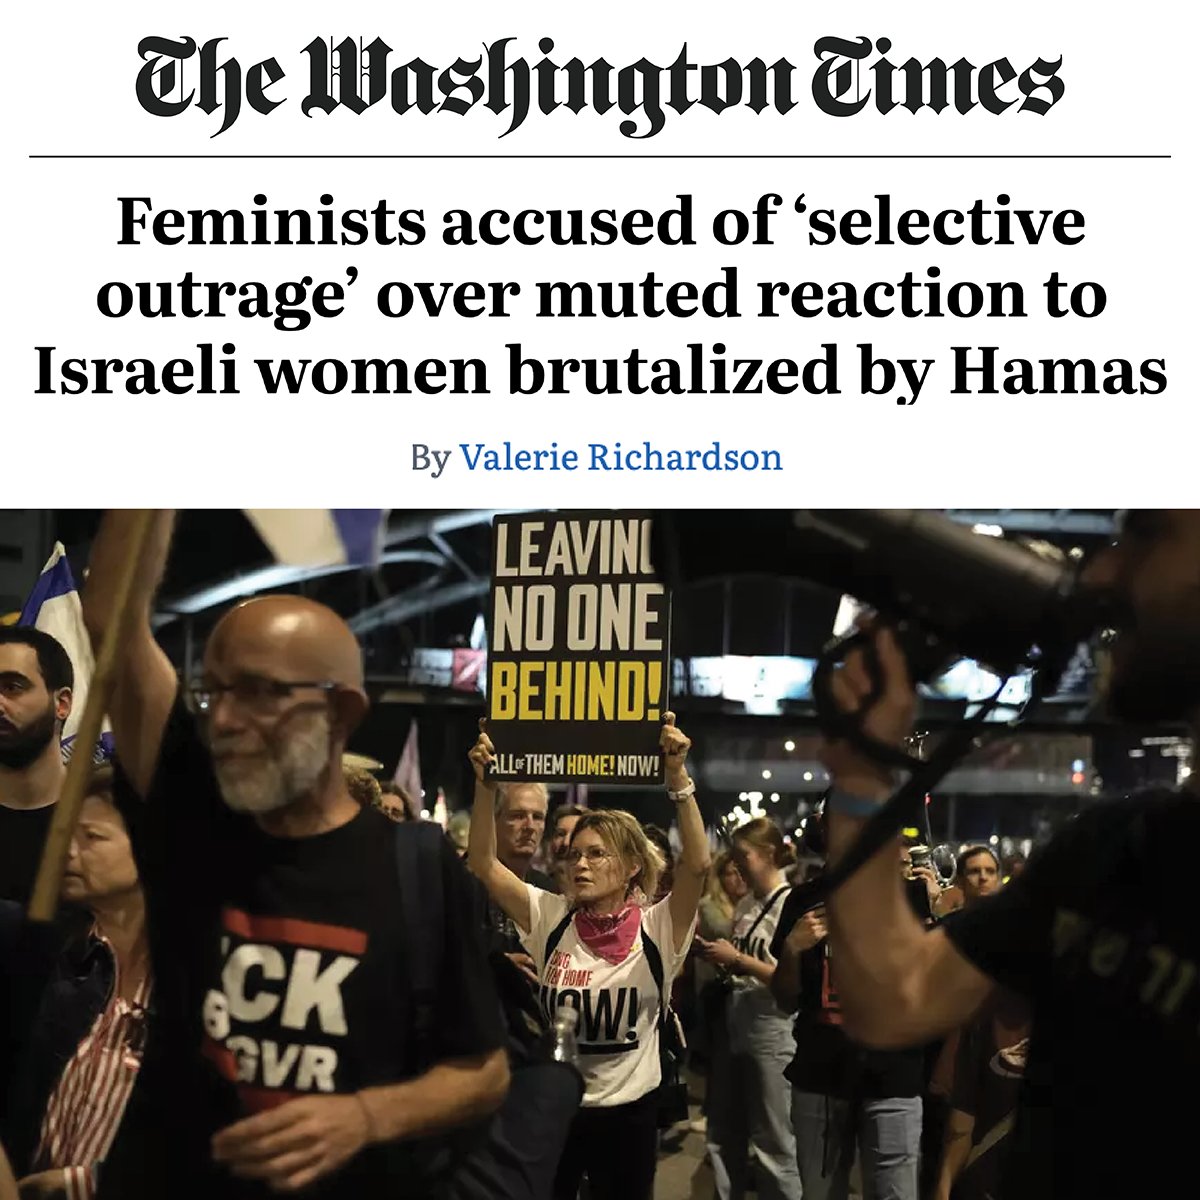 Stop the selective outrage. 🚨 Those who truly care about women should stand up for all women all the time. These are our sisters, our daughters, our moms all being held captive, brutalized & tortured. Read more & take action: @WashTimes @ValRichardson17 snip.ly/e440s5